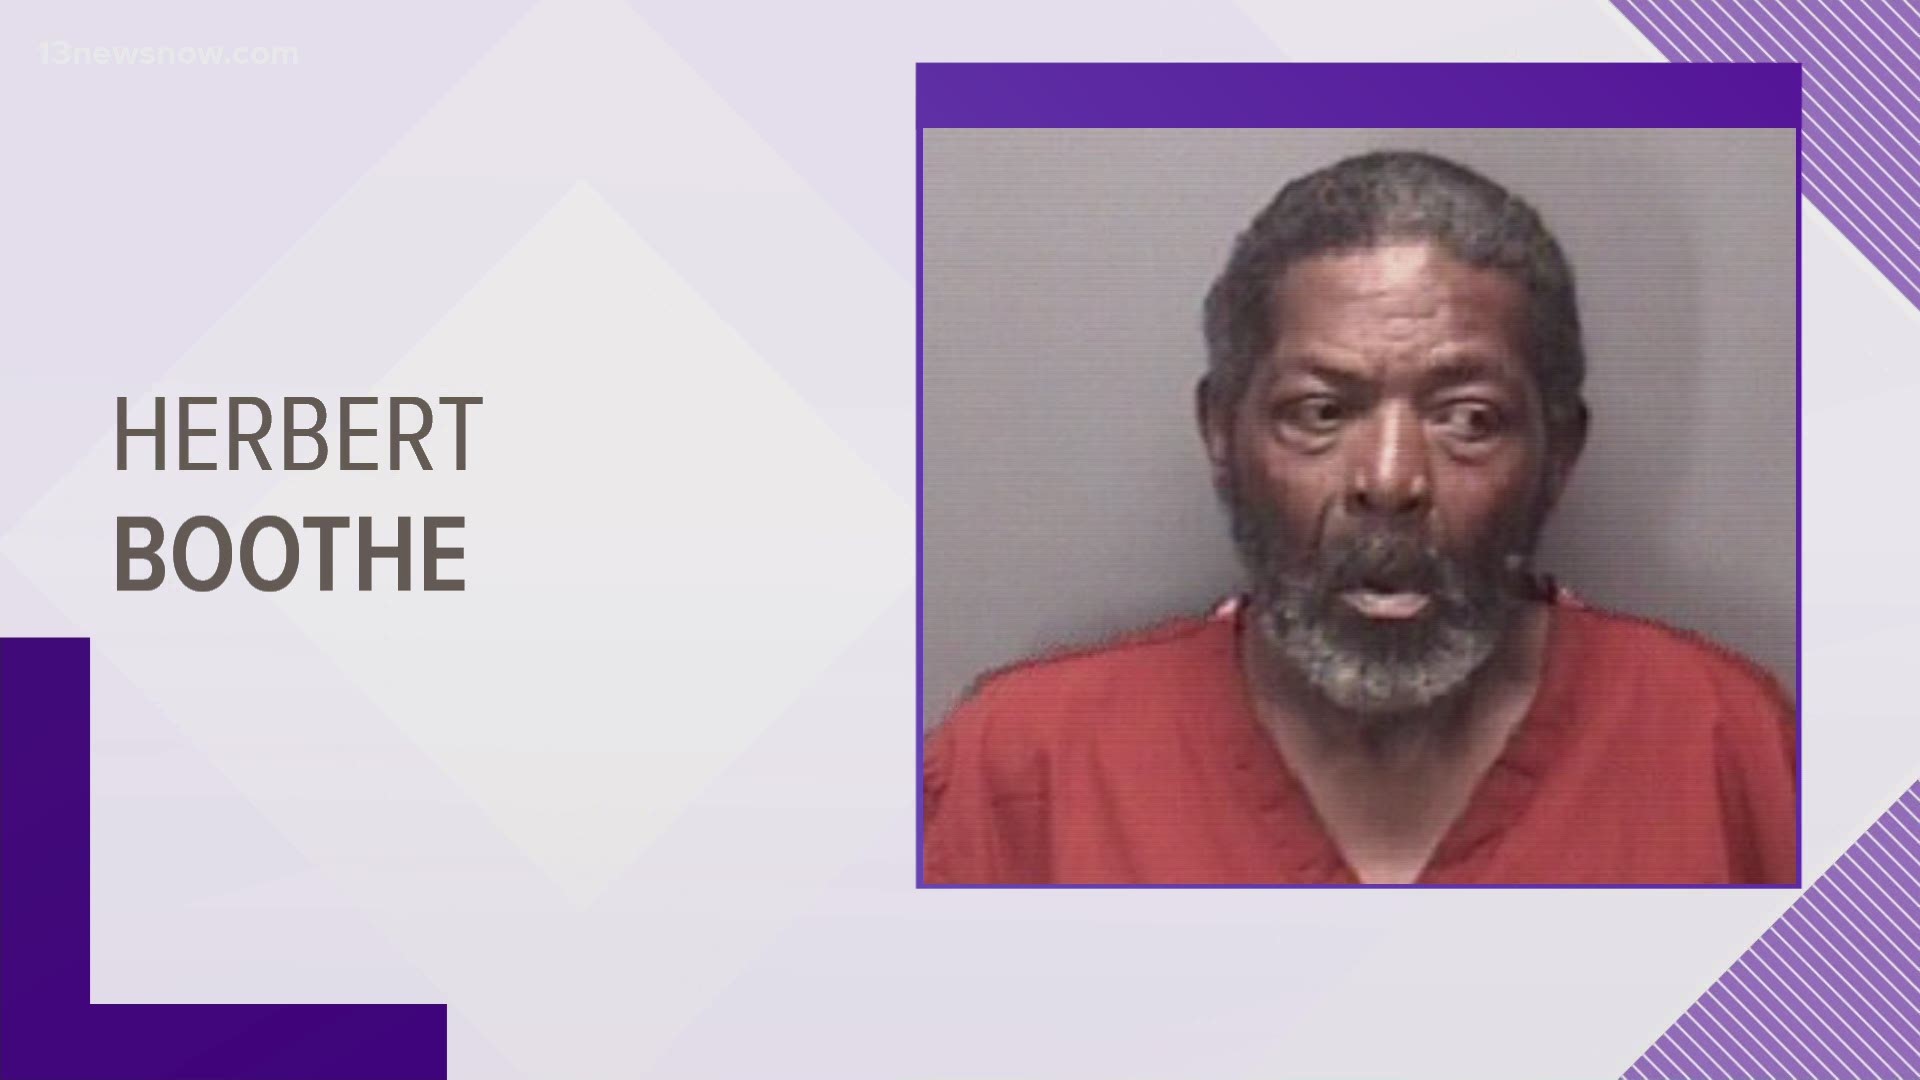 A spokeswoman for Suffolk said while Herbert Boothe, 69, was at the hospital, he spit in an officer's face and scratched the arms and chest of a nurse.